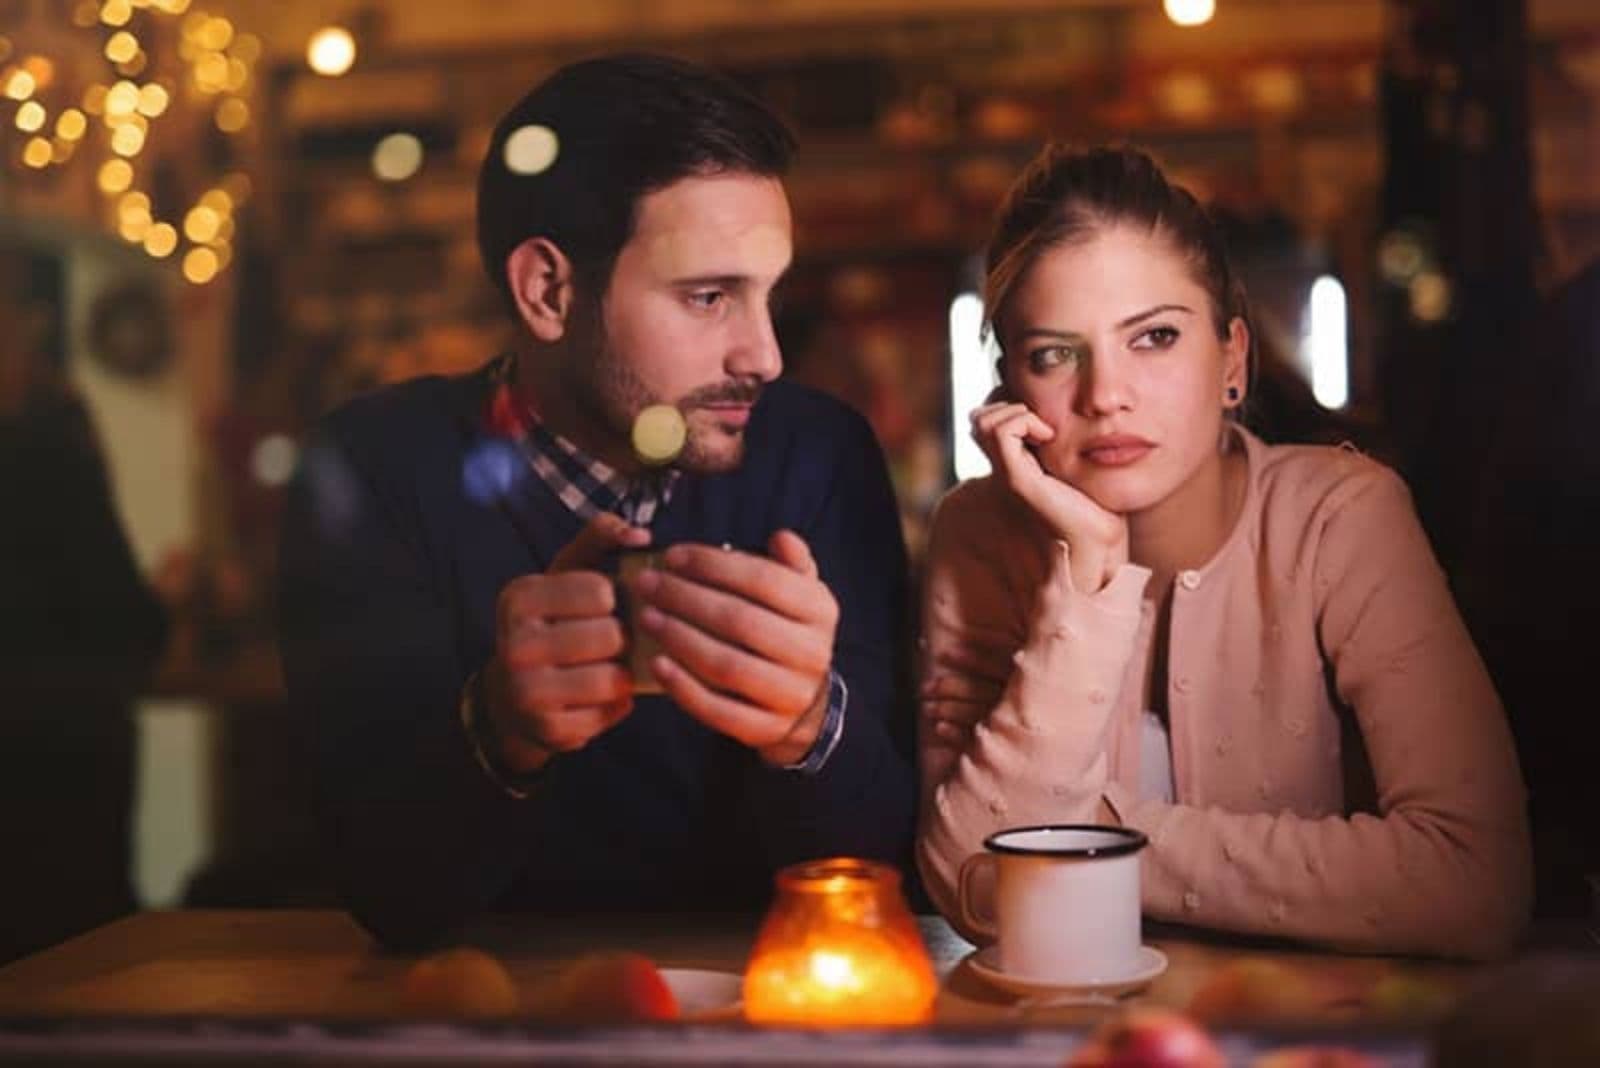 couple having serious discussion at cafe